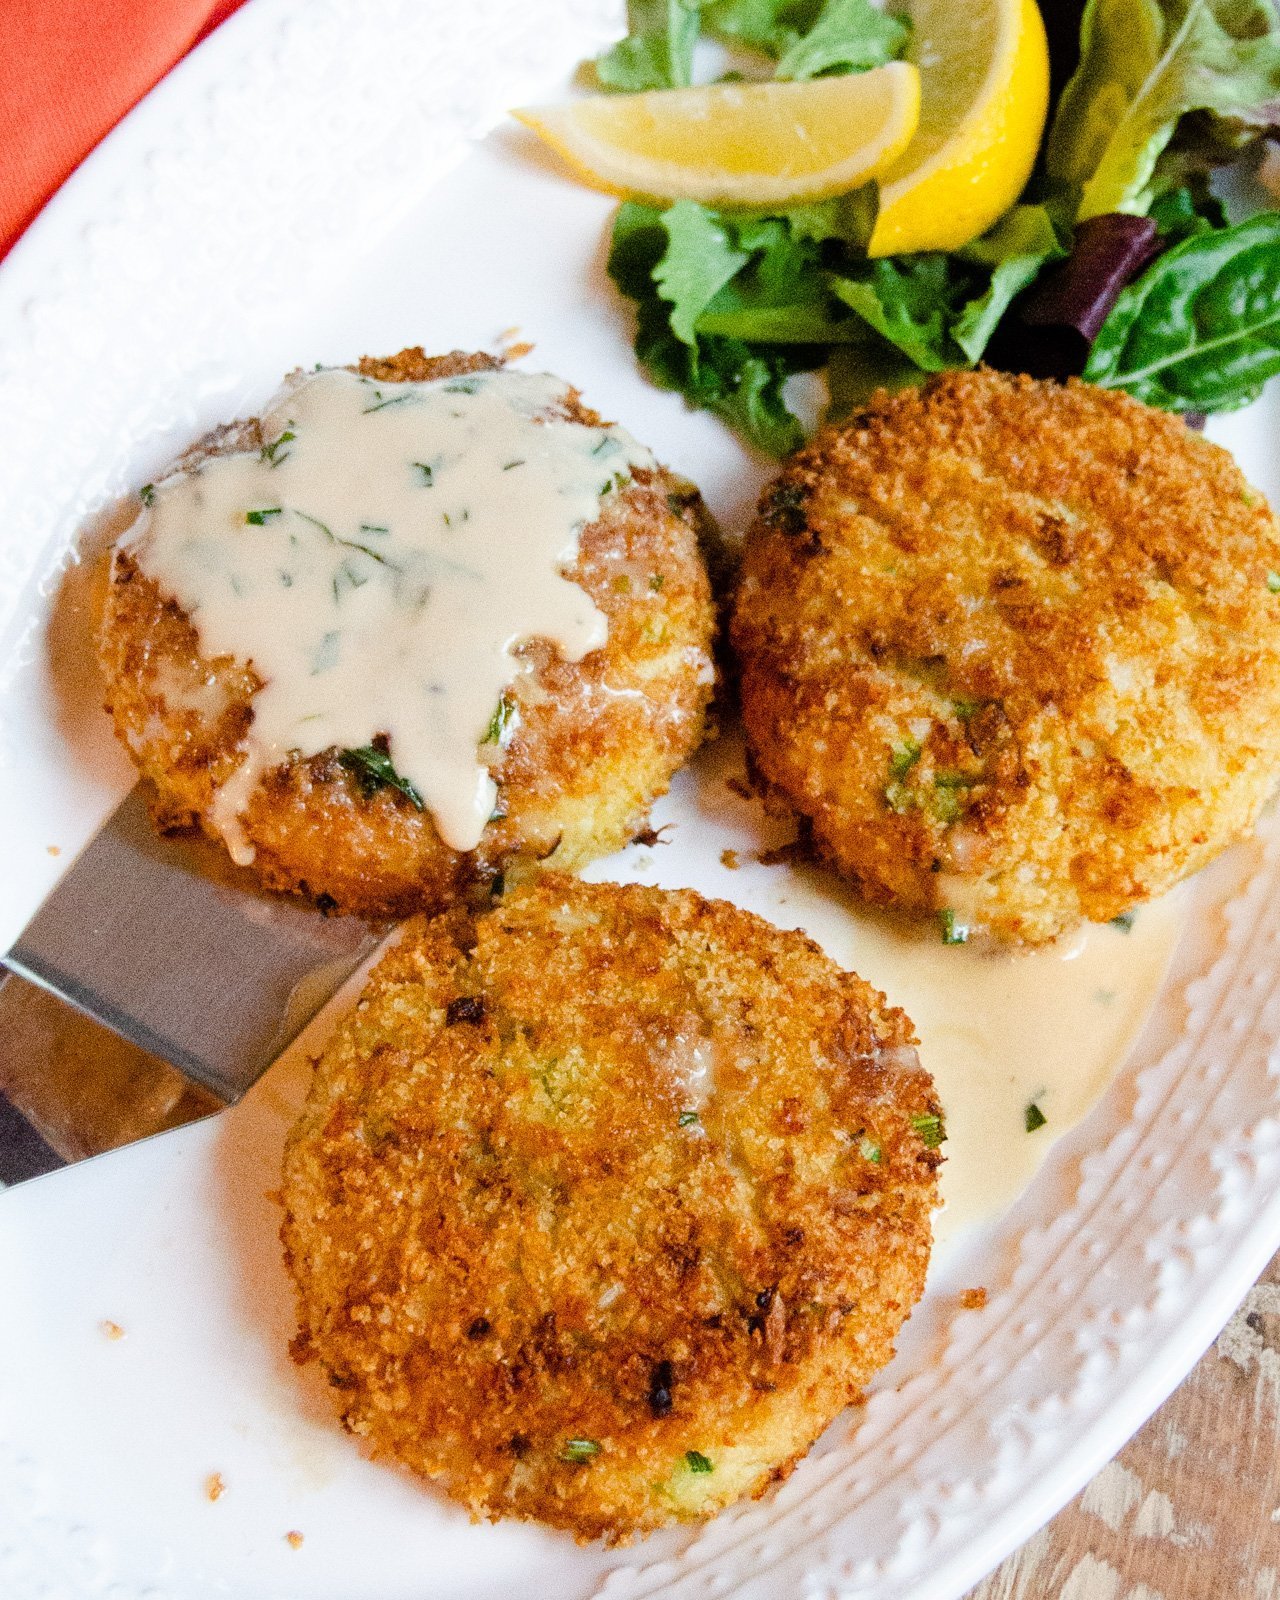 Crab Cakes - Cooking With Coit